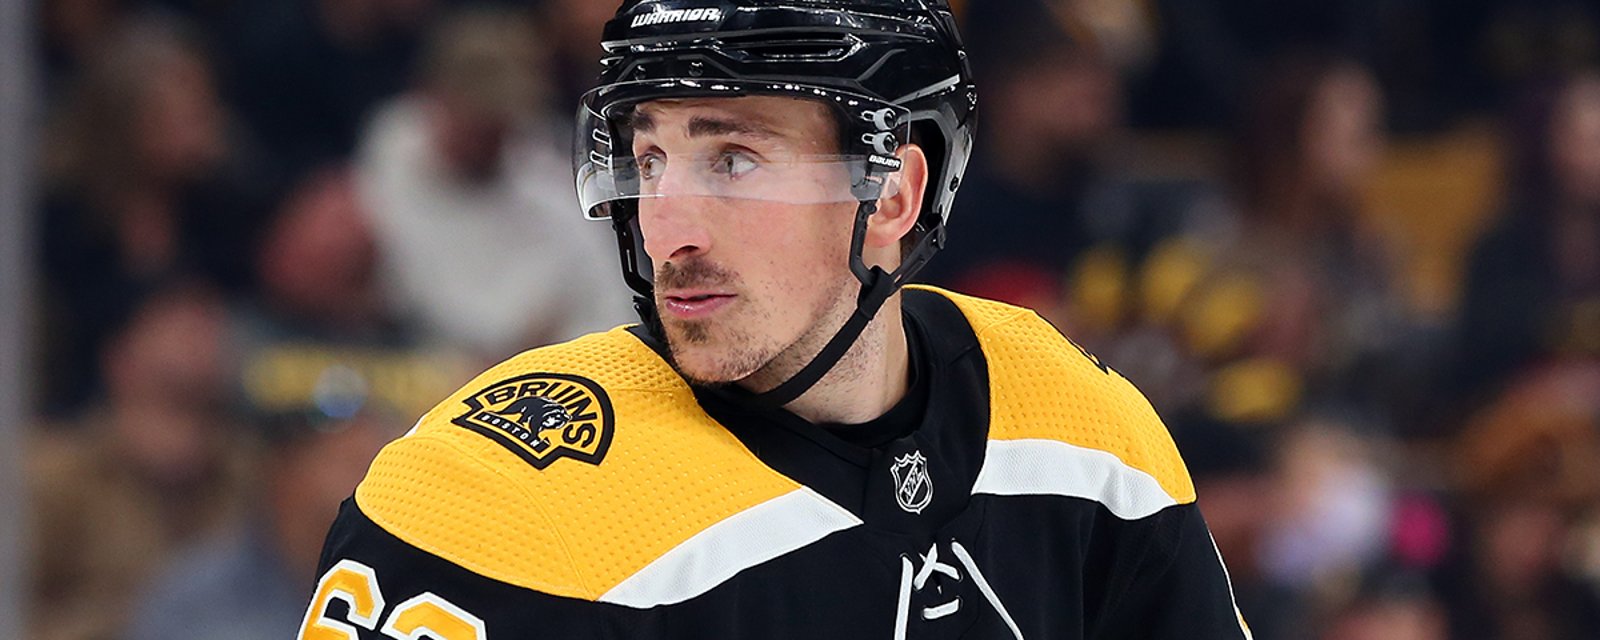 Marchand rips conditions at TD Garden ahead of Game 7 showdown